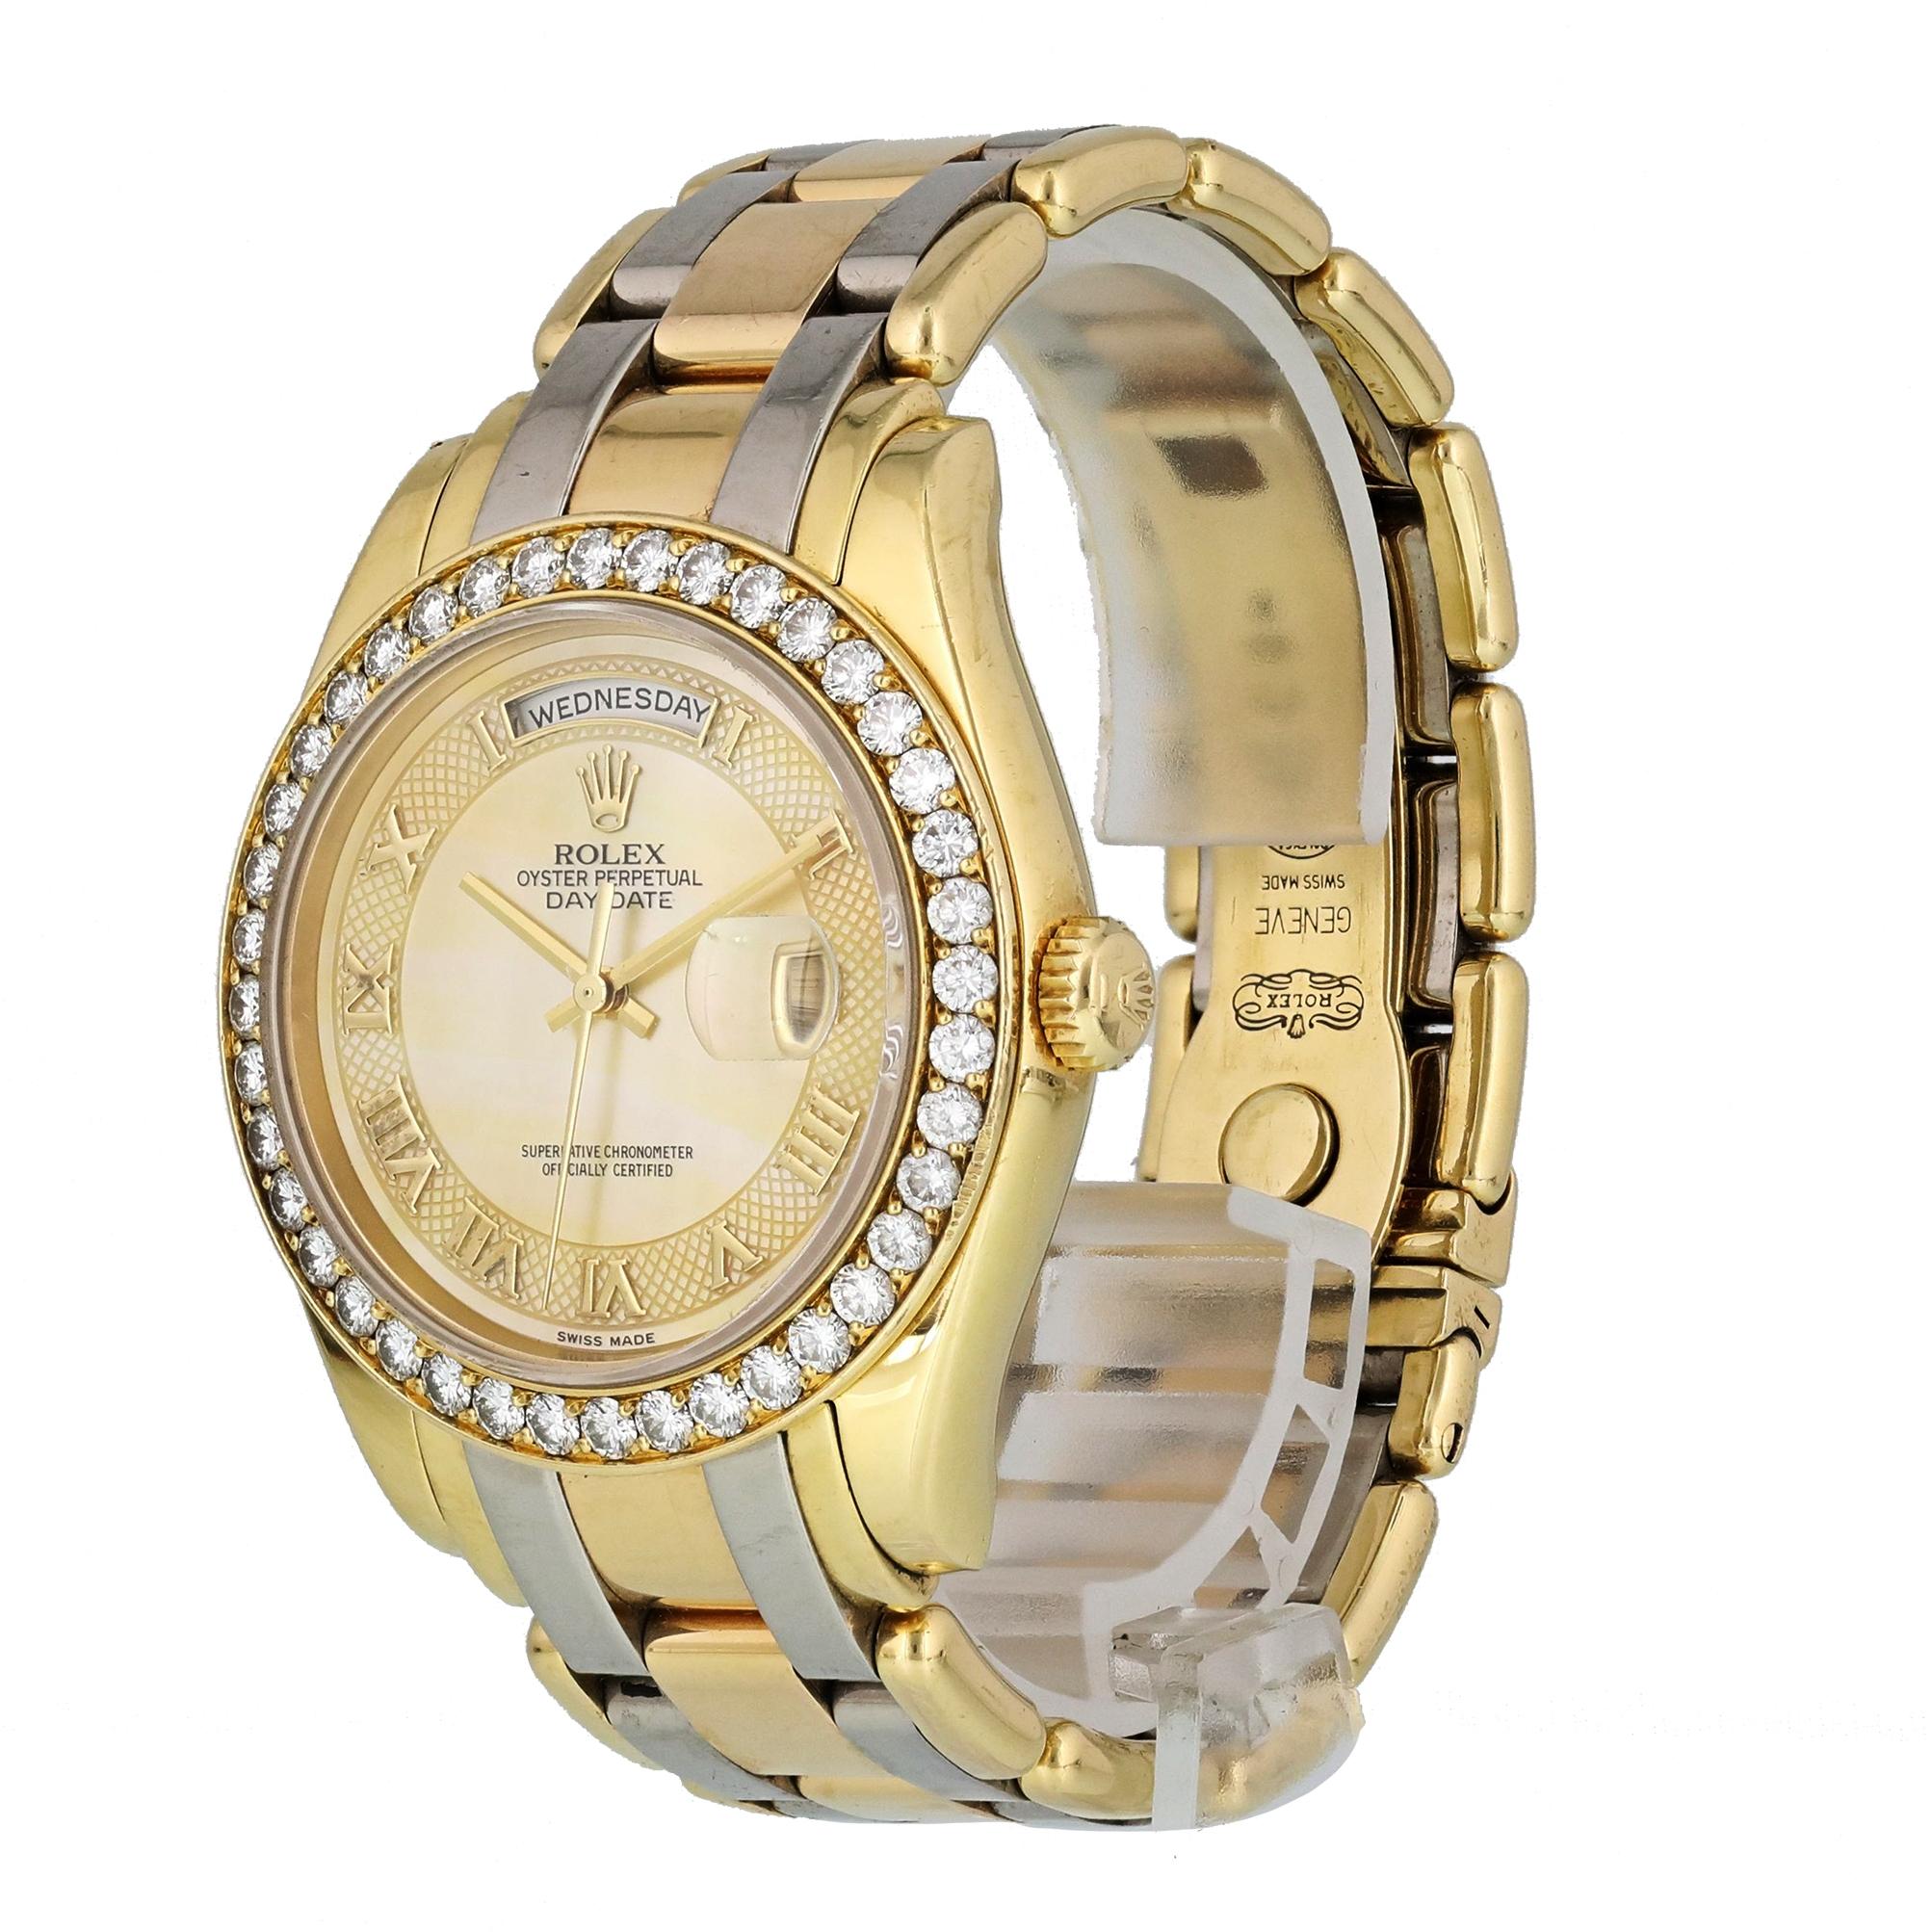 Rolex Tridor Day Date Perlmaster 18948  Mens Watch.
39mm 18k Yellow Gold case. 
Yellow Gold Stationary bezel with factory set diamonds. 
Mother-of-Pearl dial with gold hands and Roman numeral hour markers. 
Minute markers on the outer dial. 
Date